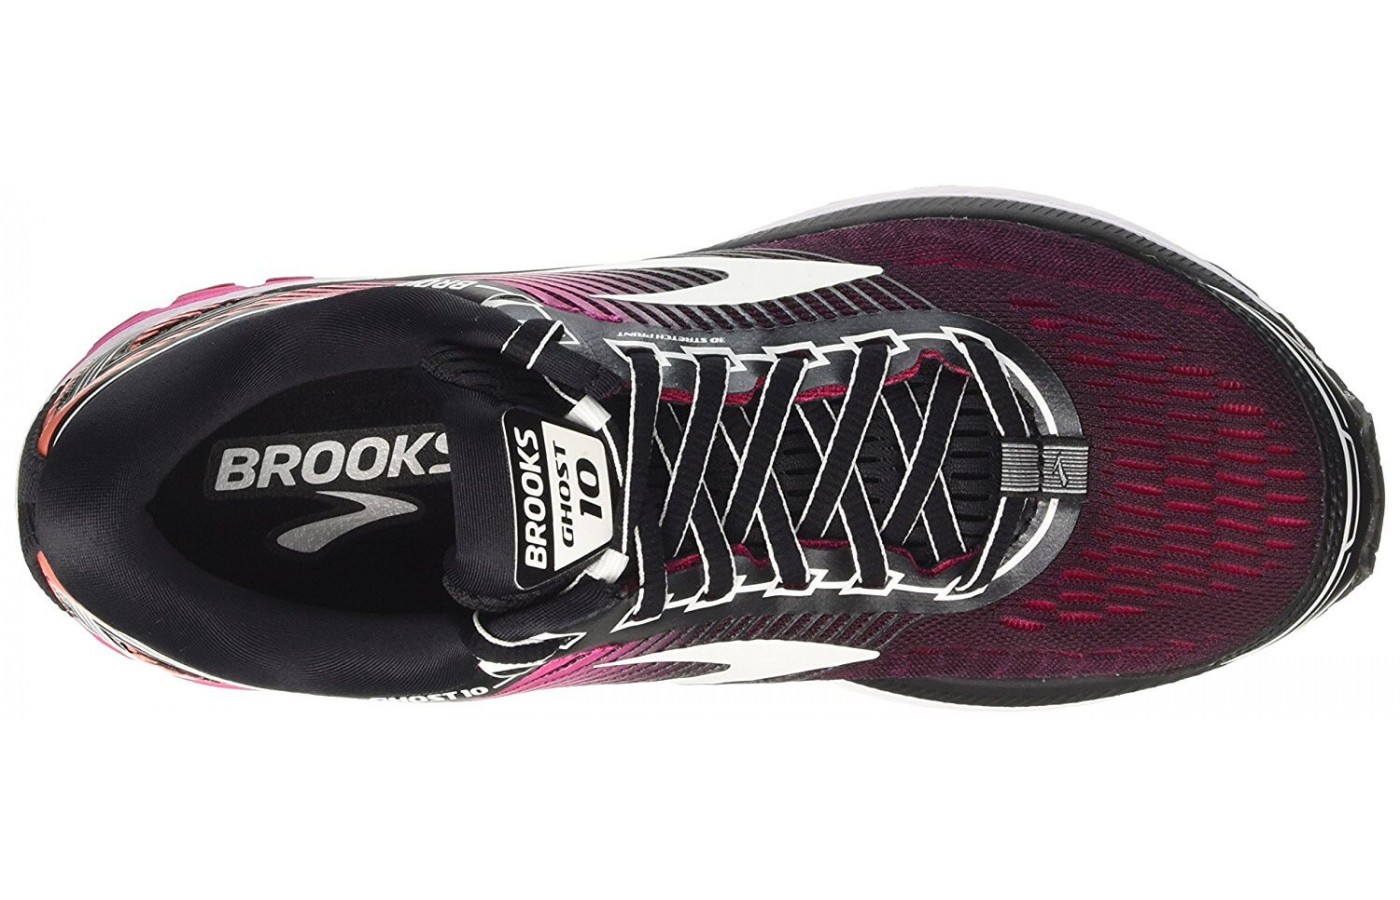 The Brooks Ghost 10 features a BioMoGo foam sock liner